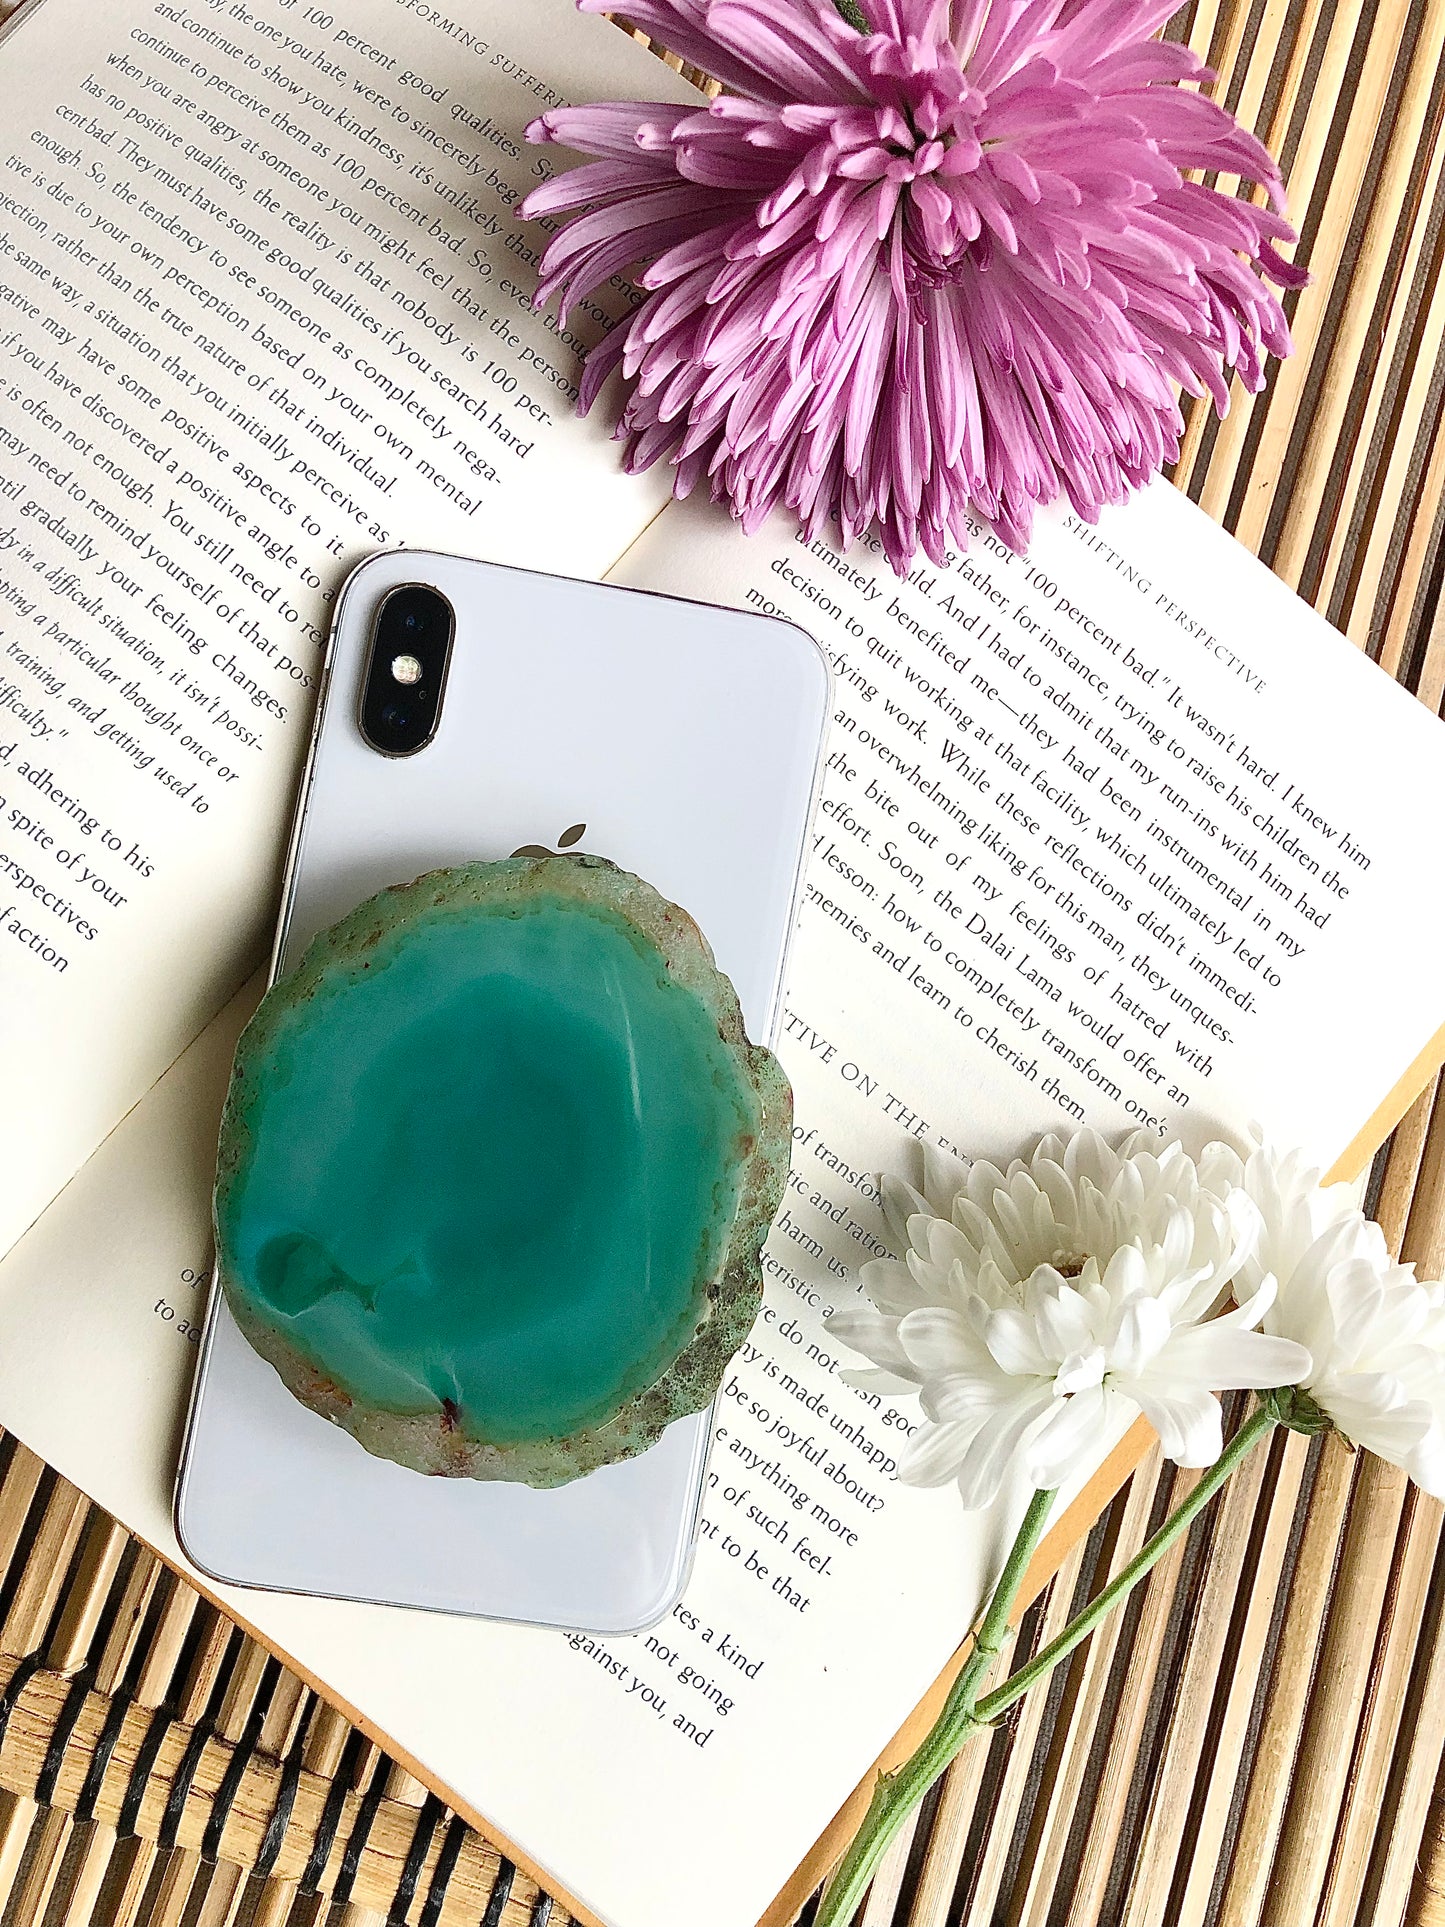 Natural greenish blue agate phone grip presented on iPhone 8, laying on top of open book, framed by for and yellow flowers